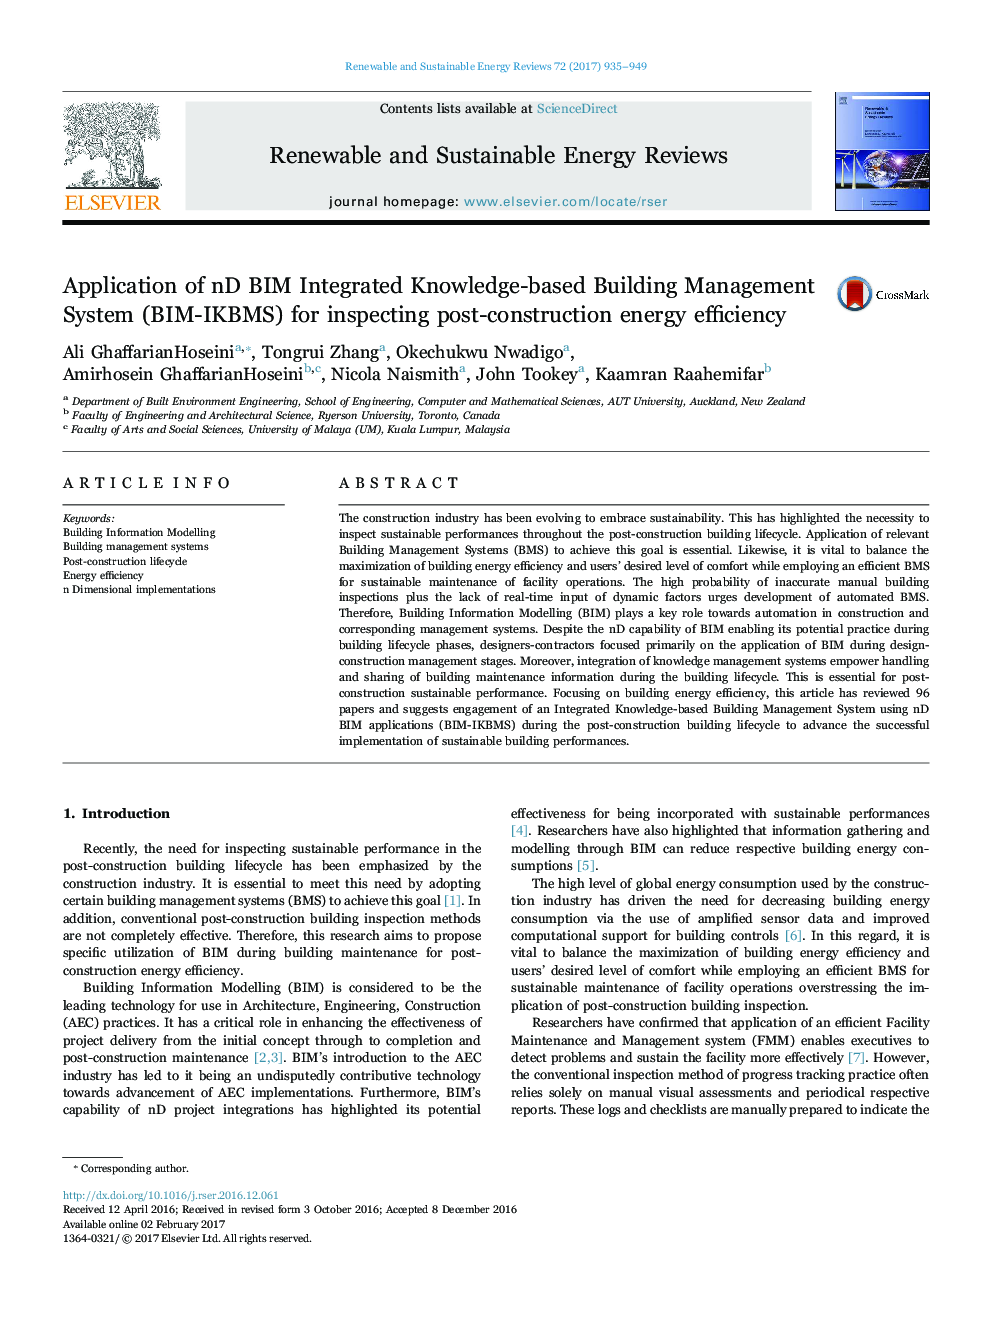 Application of nD BIM Integrated Knowledge-based Building Management System (BIM-IKBMS) for inspecting post-construction energy efficiency